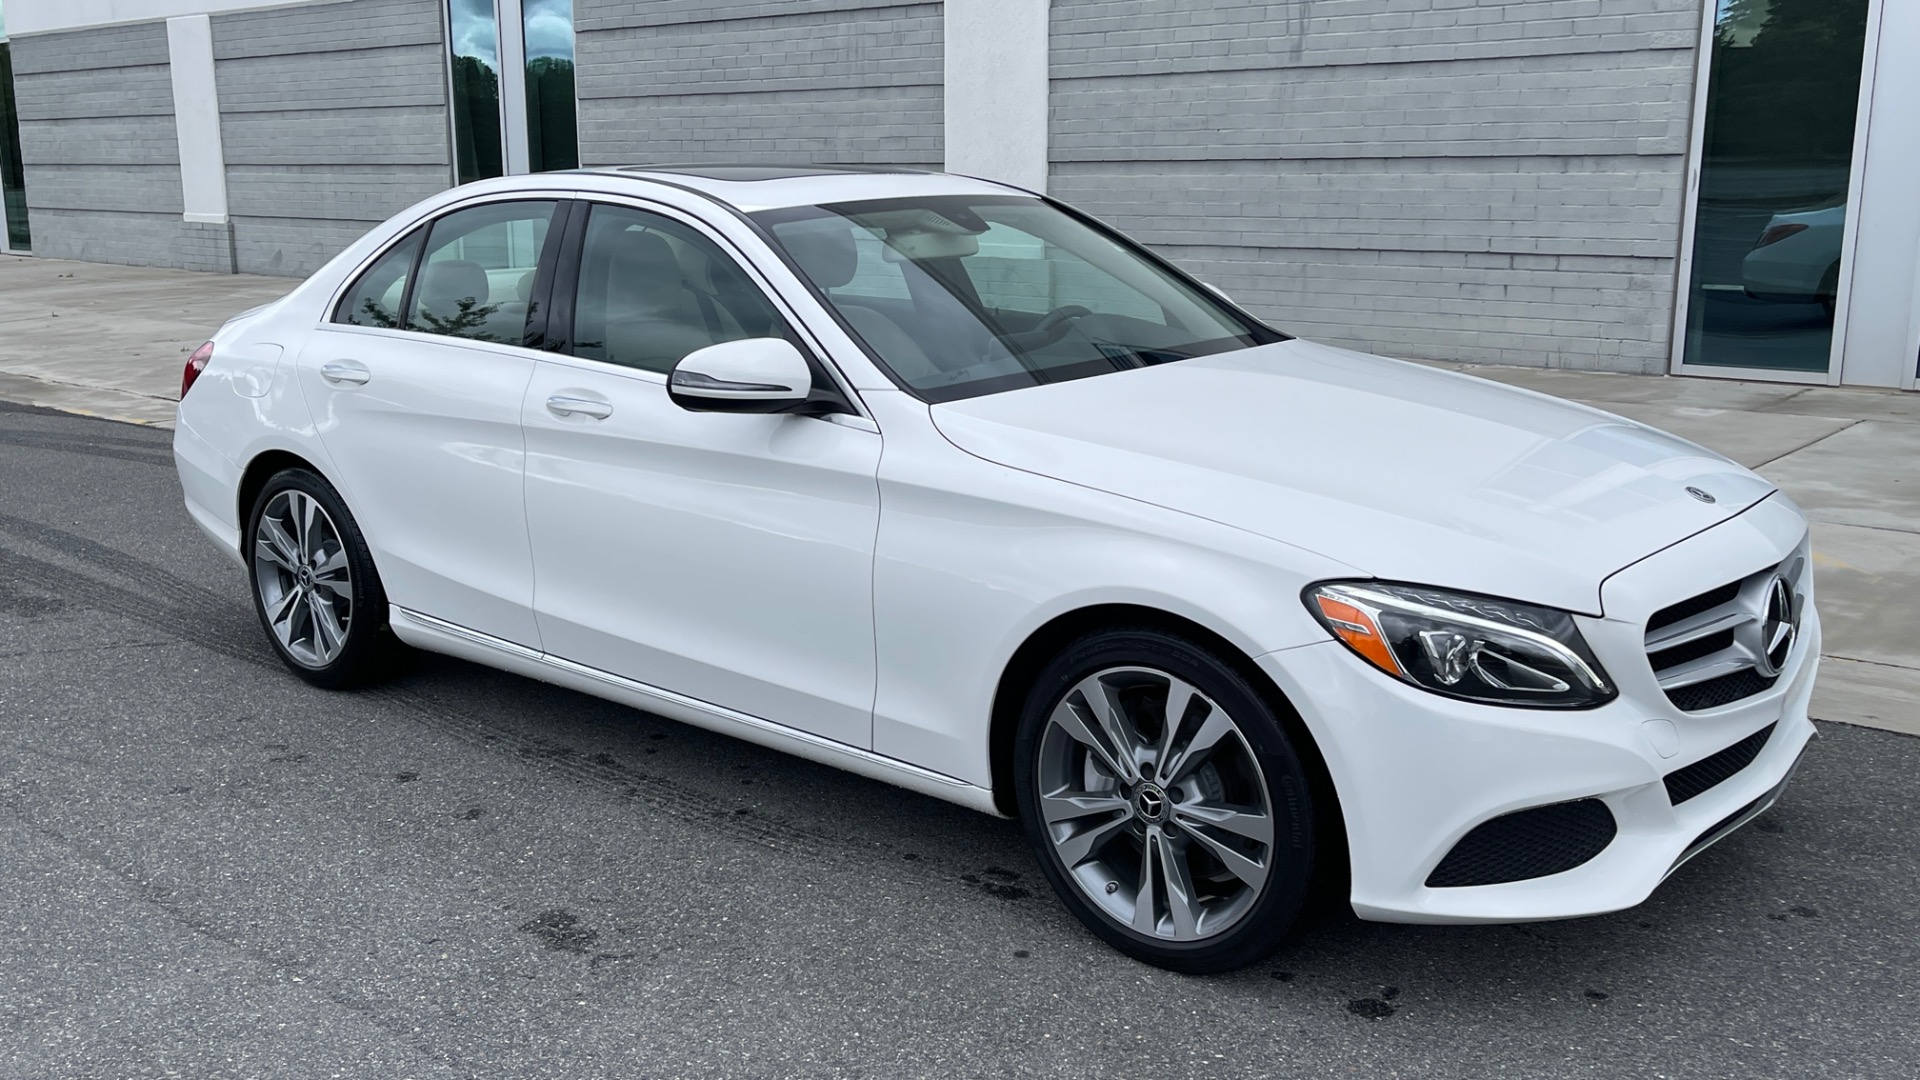 Used 2018 Mercedes-Benz C-CLASS C 300 PREMIUM / NAV / HTD STS / APPLE CARPLAY / REARVIEW for sale Sold at Formula Imports in Charlotte NC 28227 7